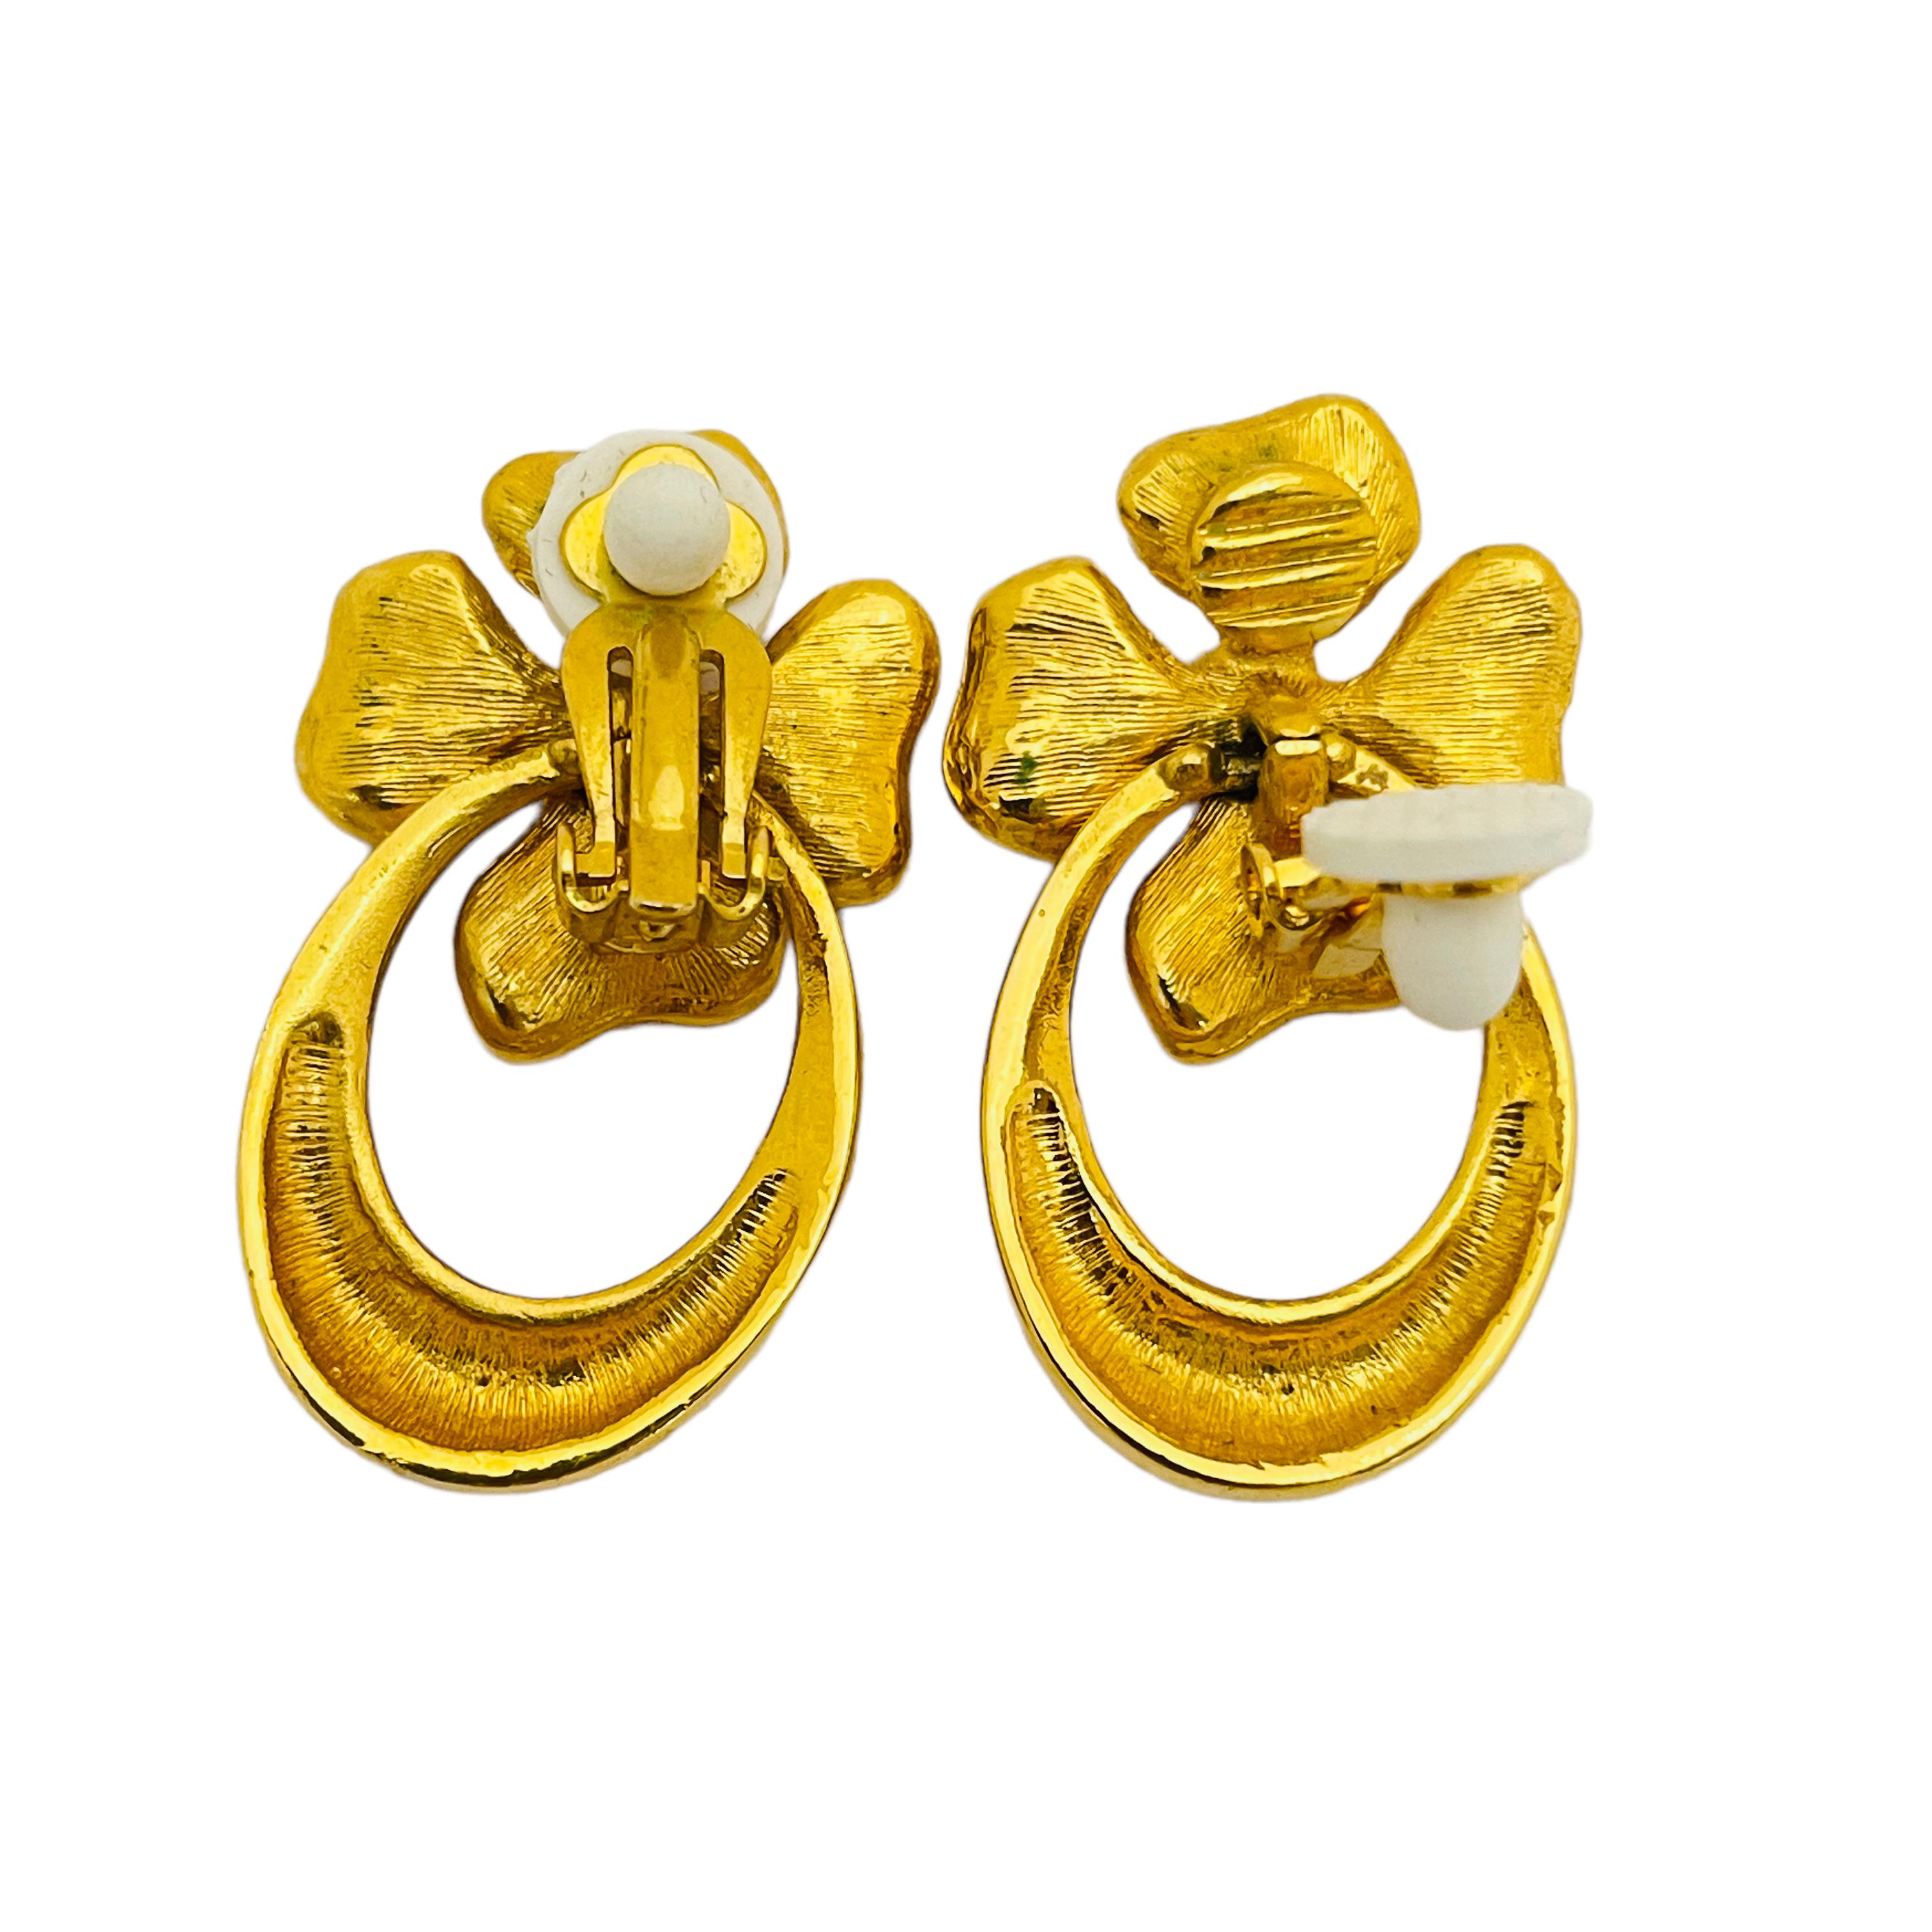 Vintage gold enamel flower designer runway clip on earrings In Good Condition For Sale In Palos Hills, IL